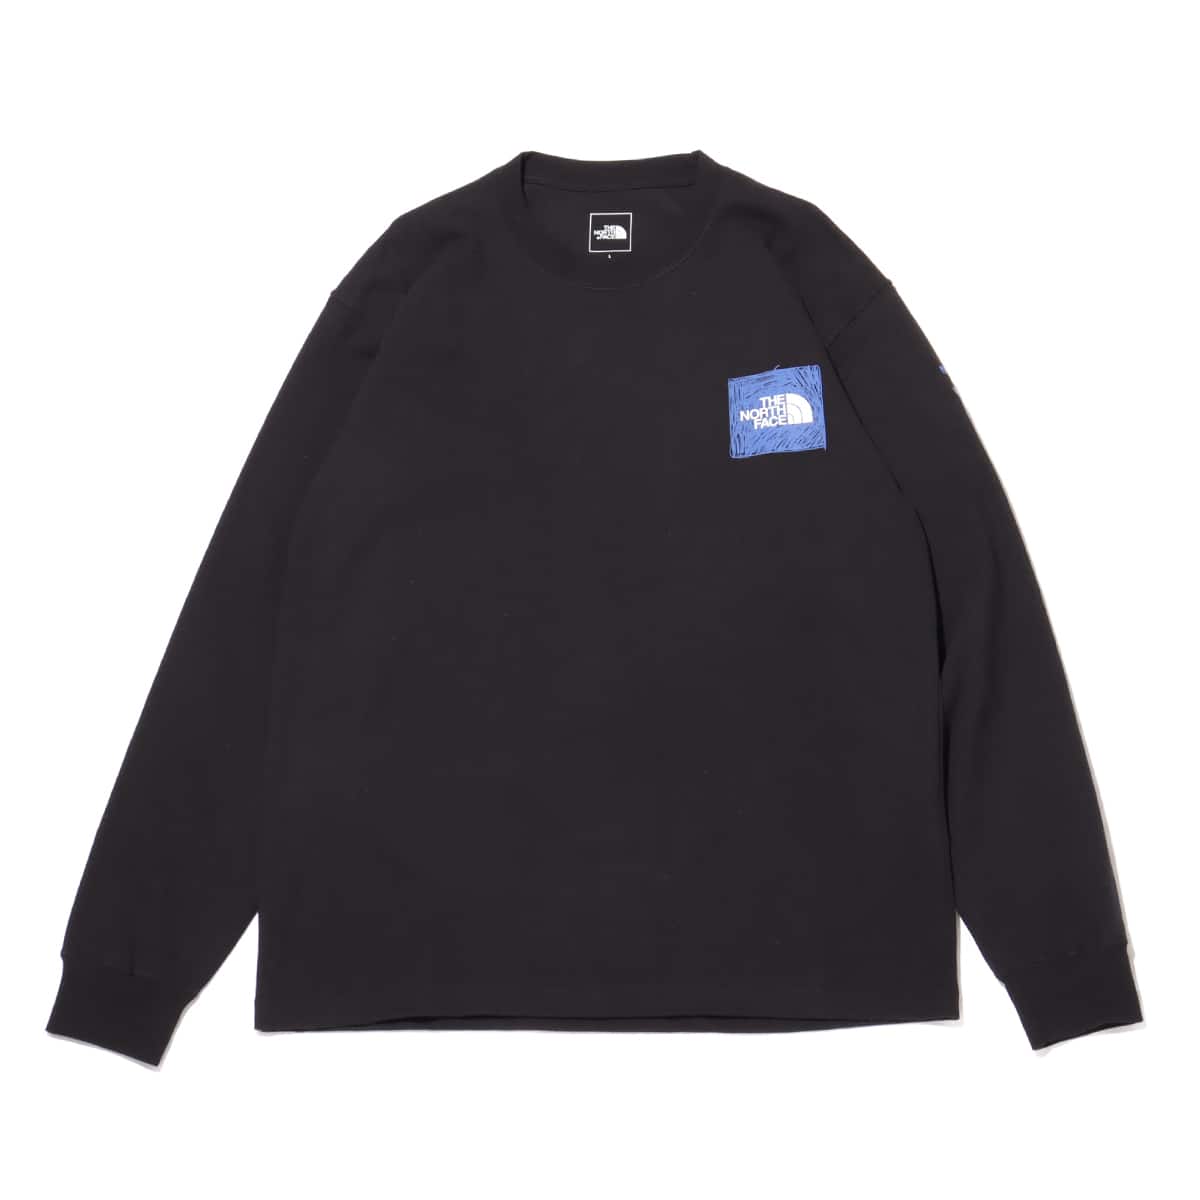 THE NORTH FACE L/S Sleeve Graphic Tee ブラック 24SS-I